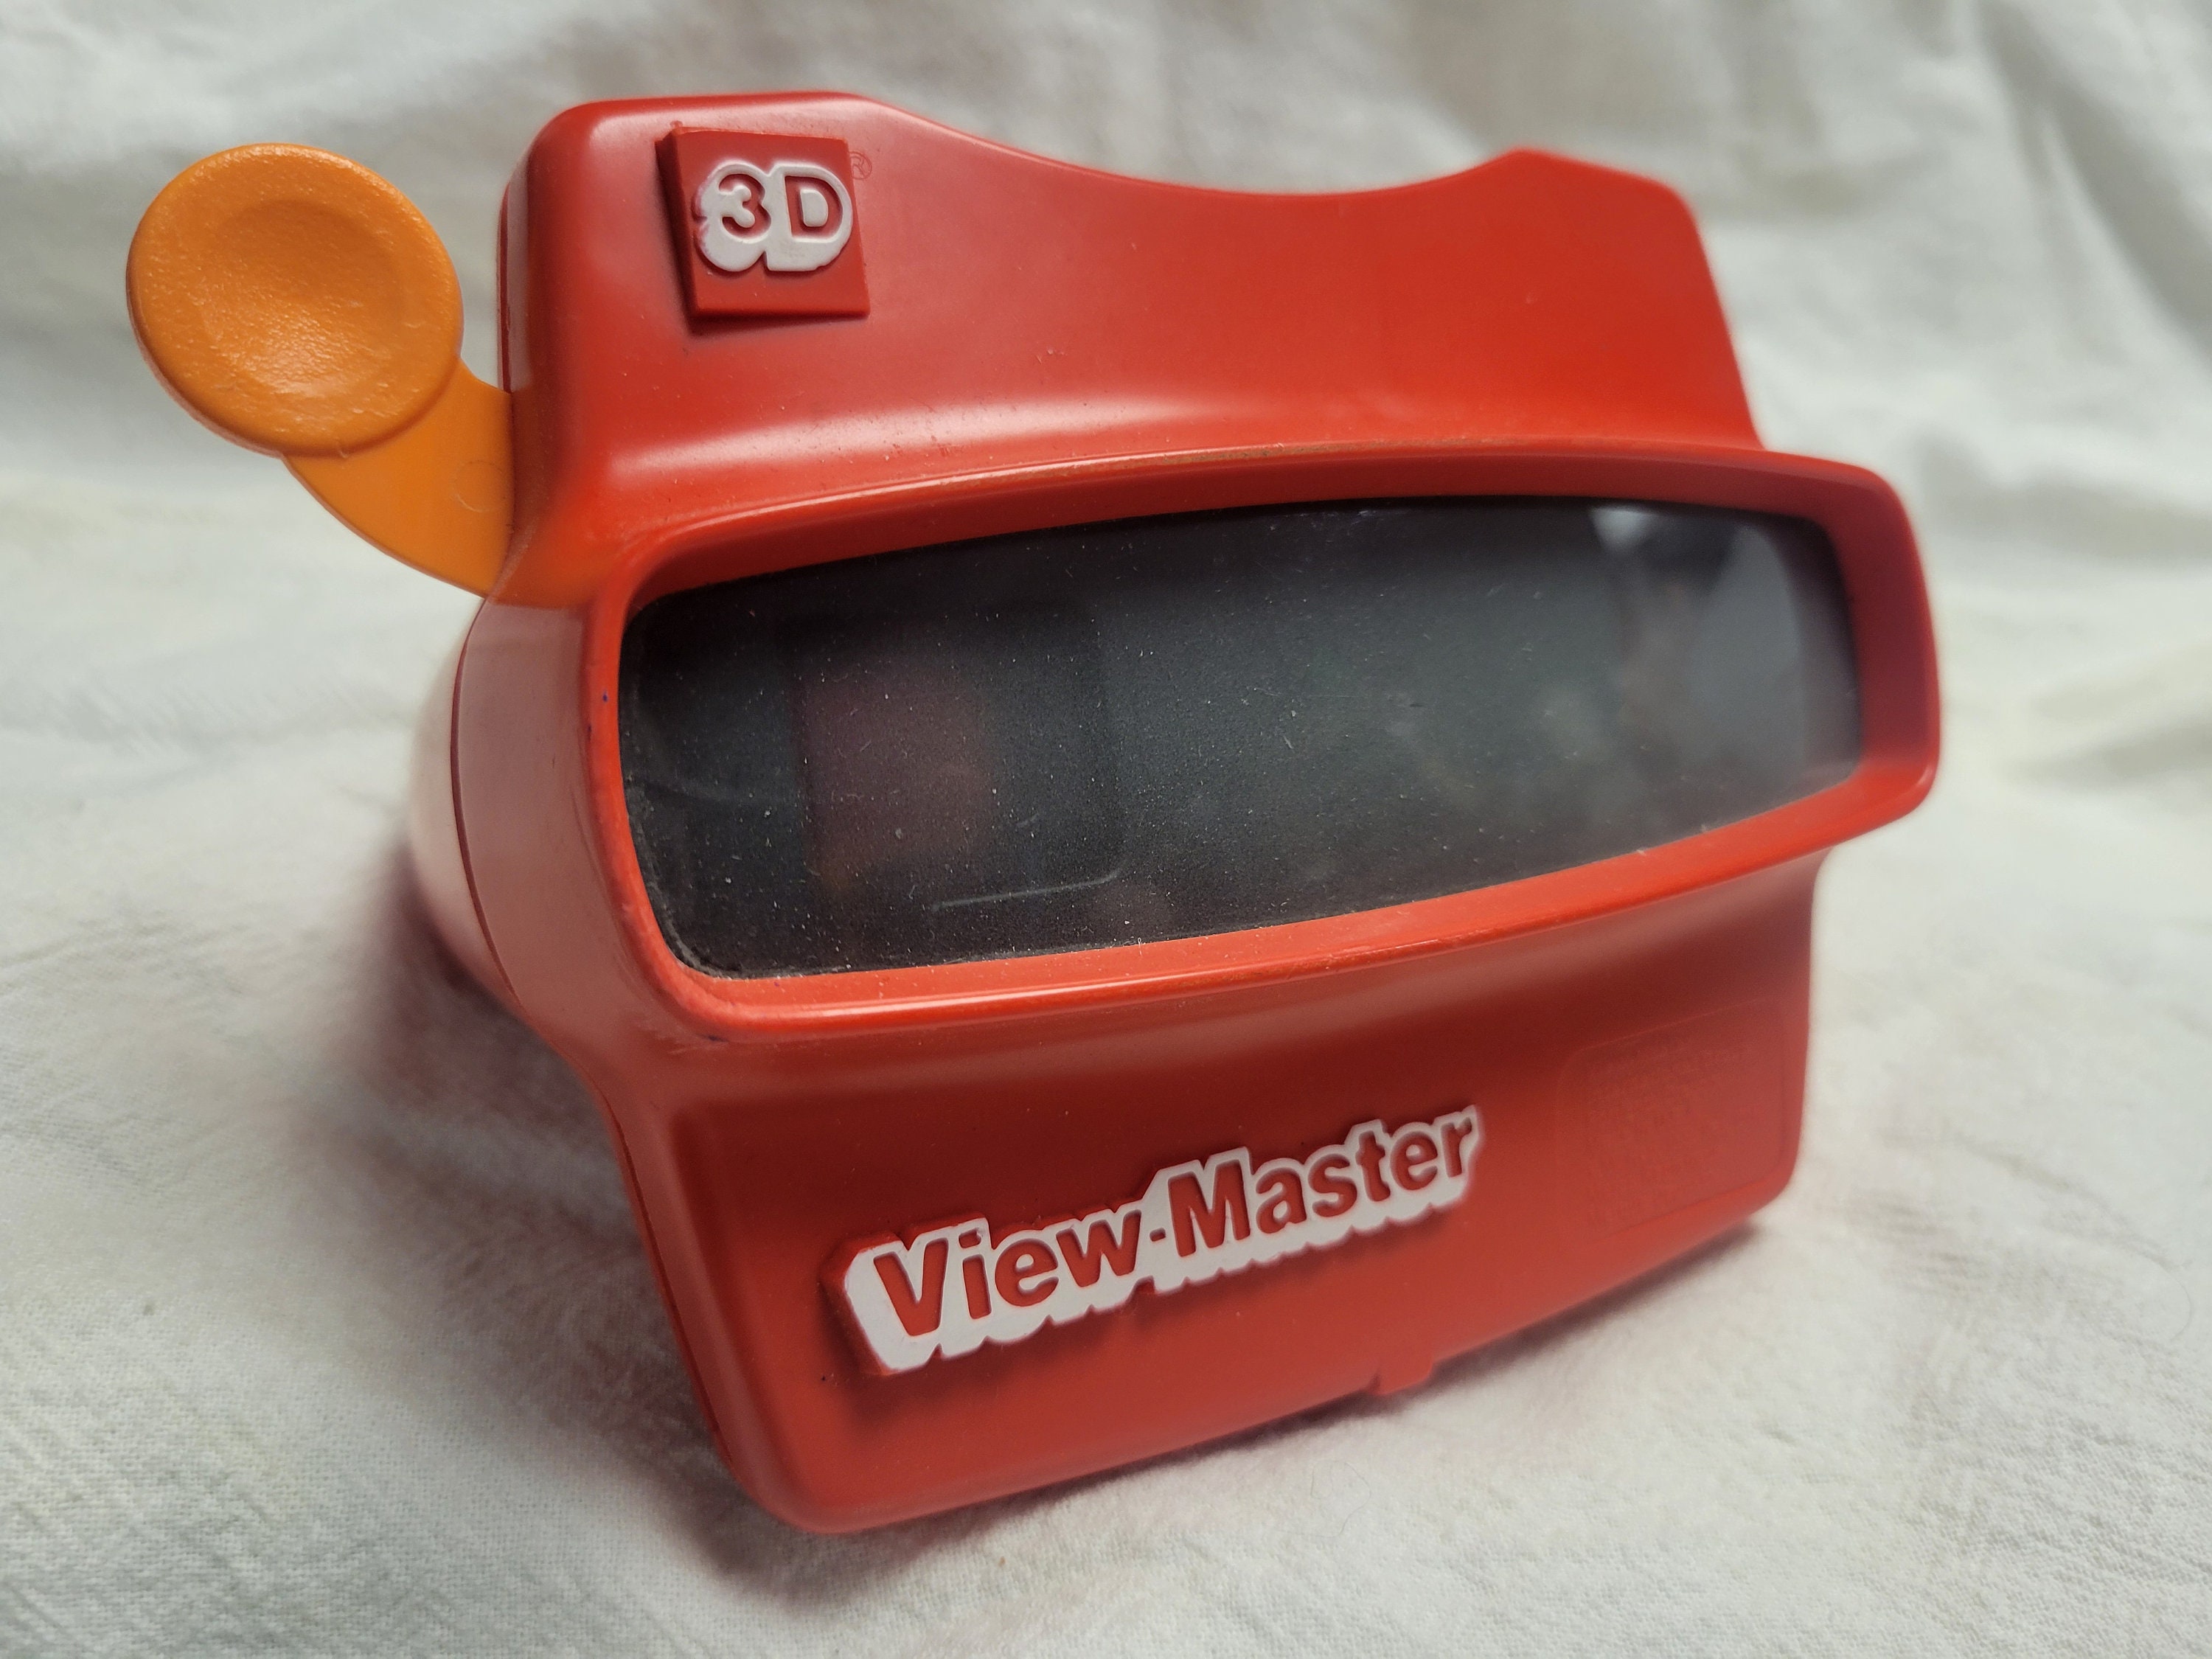  WARM FUZZY Toys 3D Viewfinder (Sea Life) - Viewfinder for Kids  & Adults, Classic Toys, Slide Viewer, 3D Reel Viewer, Retro Toys, Vintage  Toys with 3 Reels - Contains 21 High